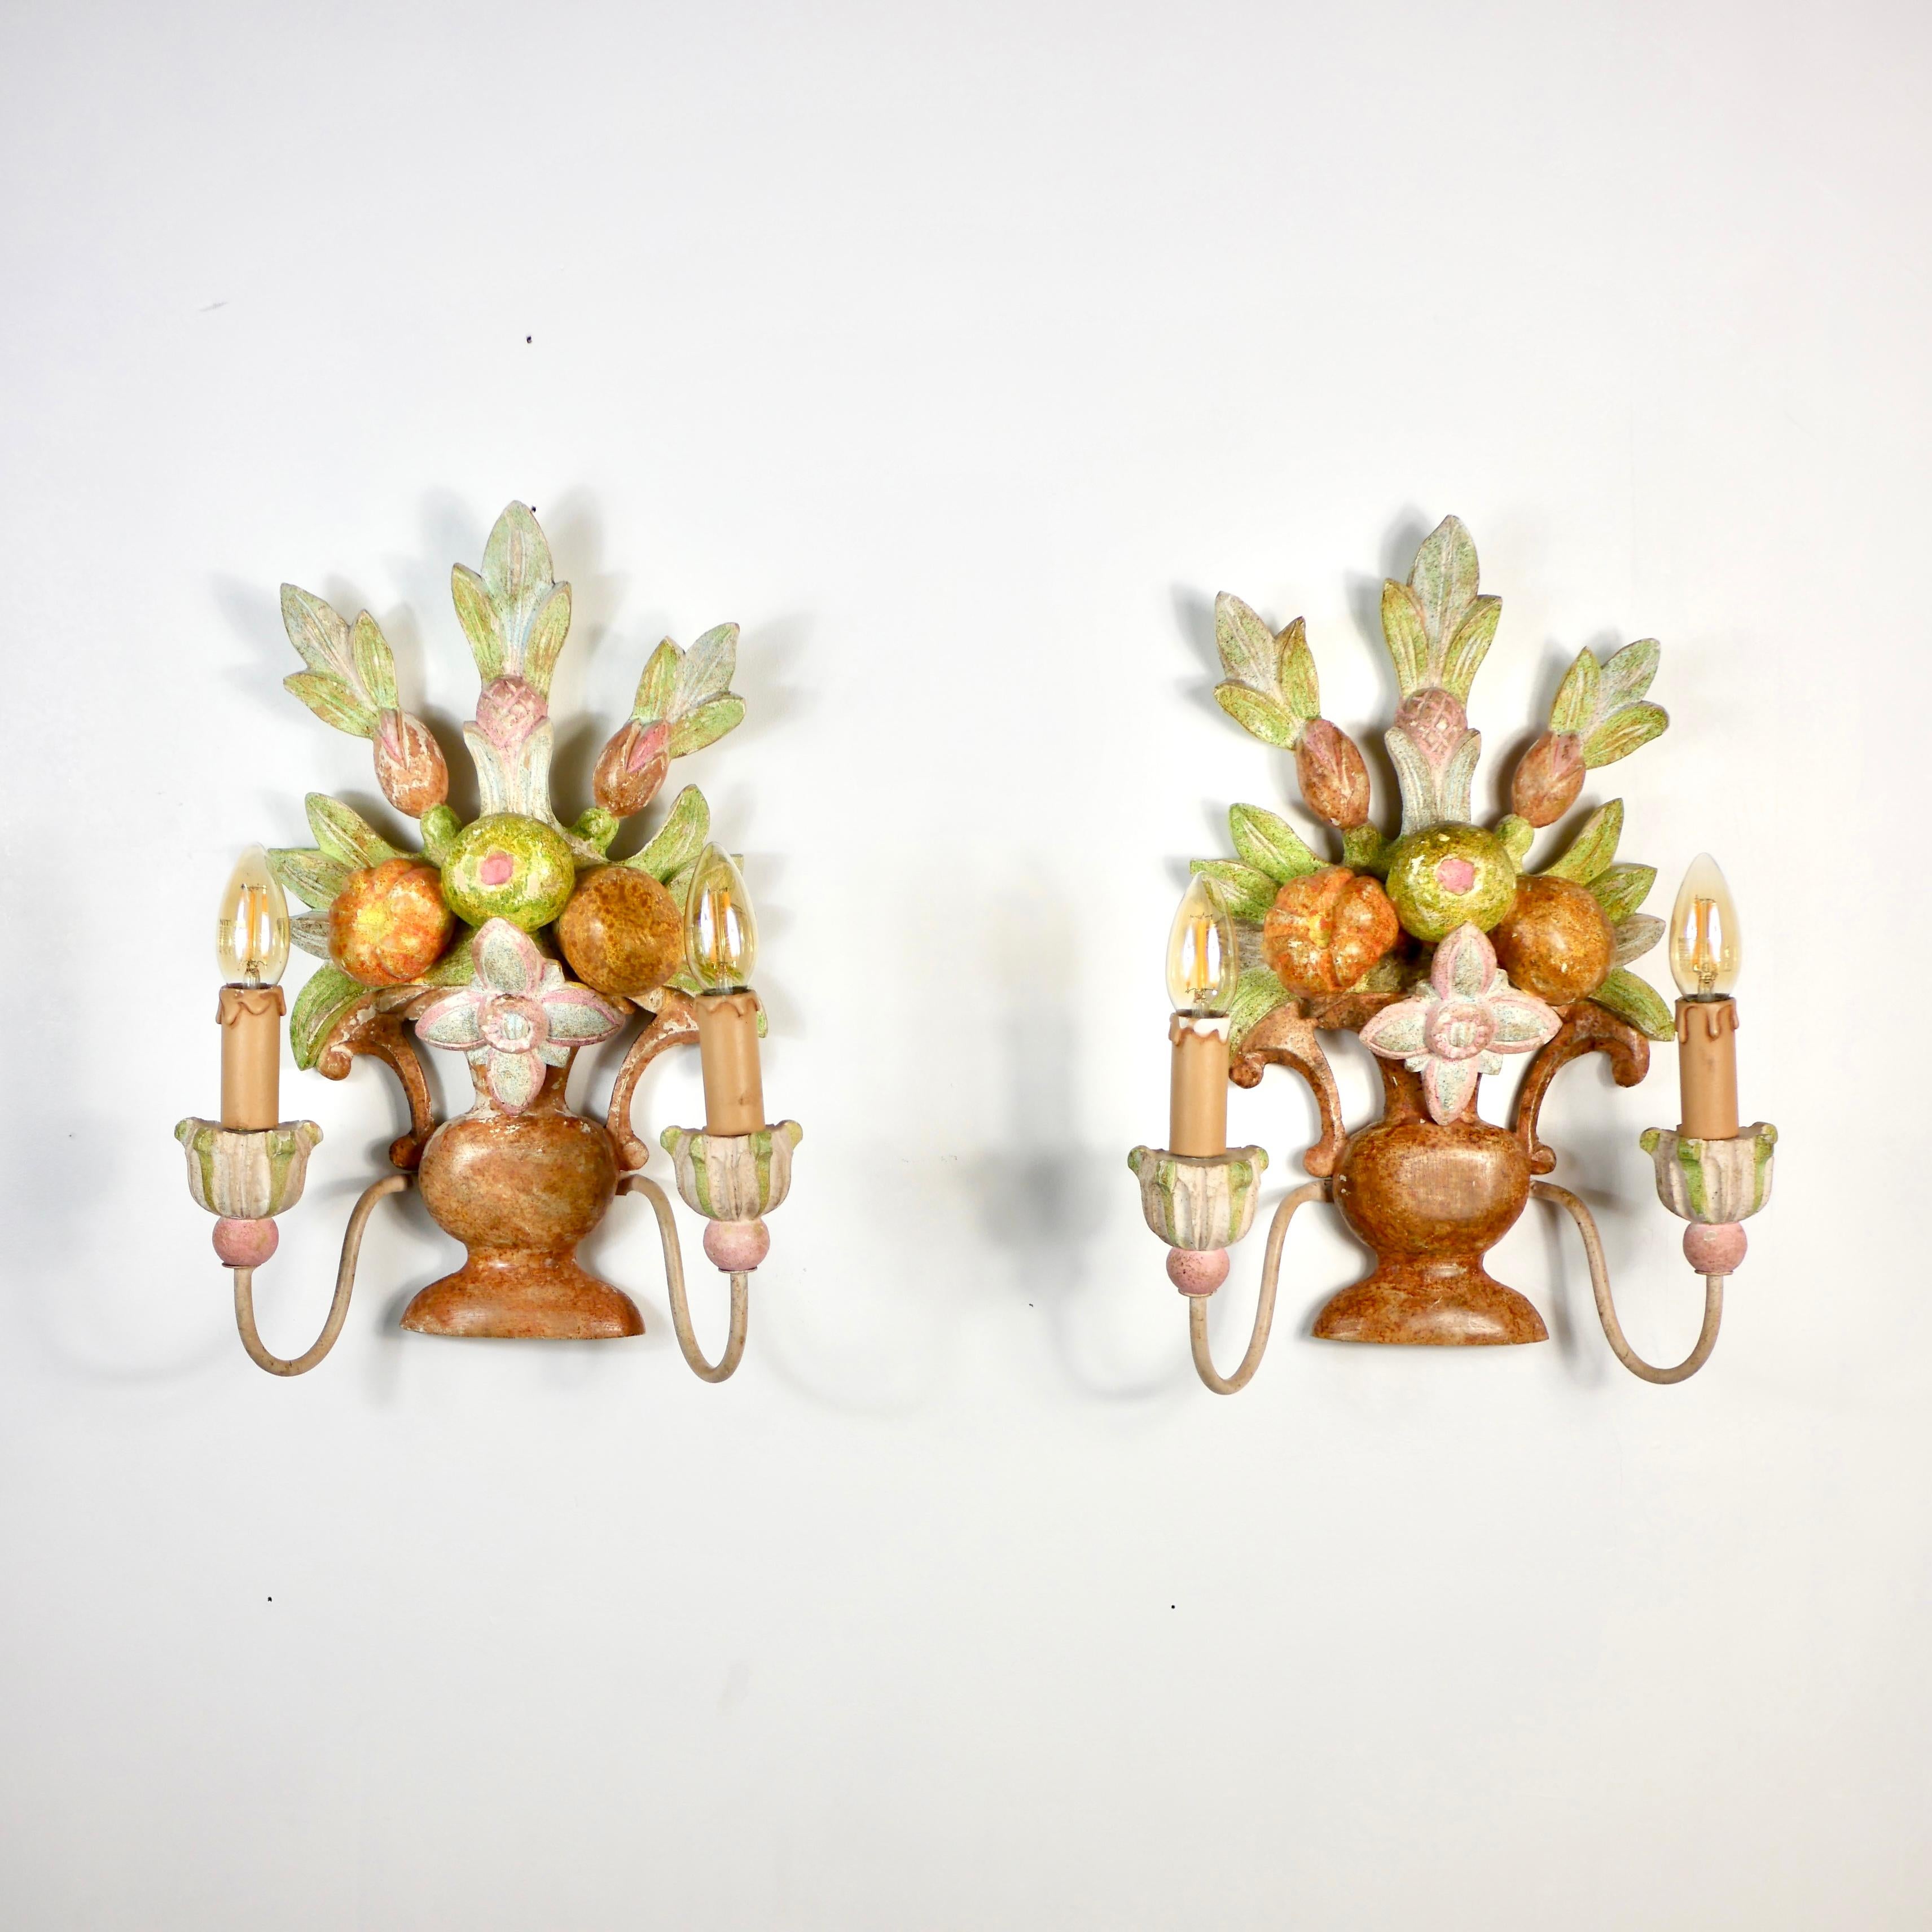 Beautiful pair of hand-carved wood sconces made in Italy in the early 20th century, depicting bunches / baskets of flowers, leaves and fruits, in the style of Maison Jansen.
Hand-painted, each sconce has two metal 